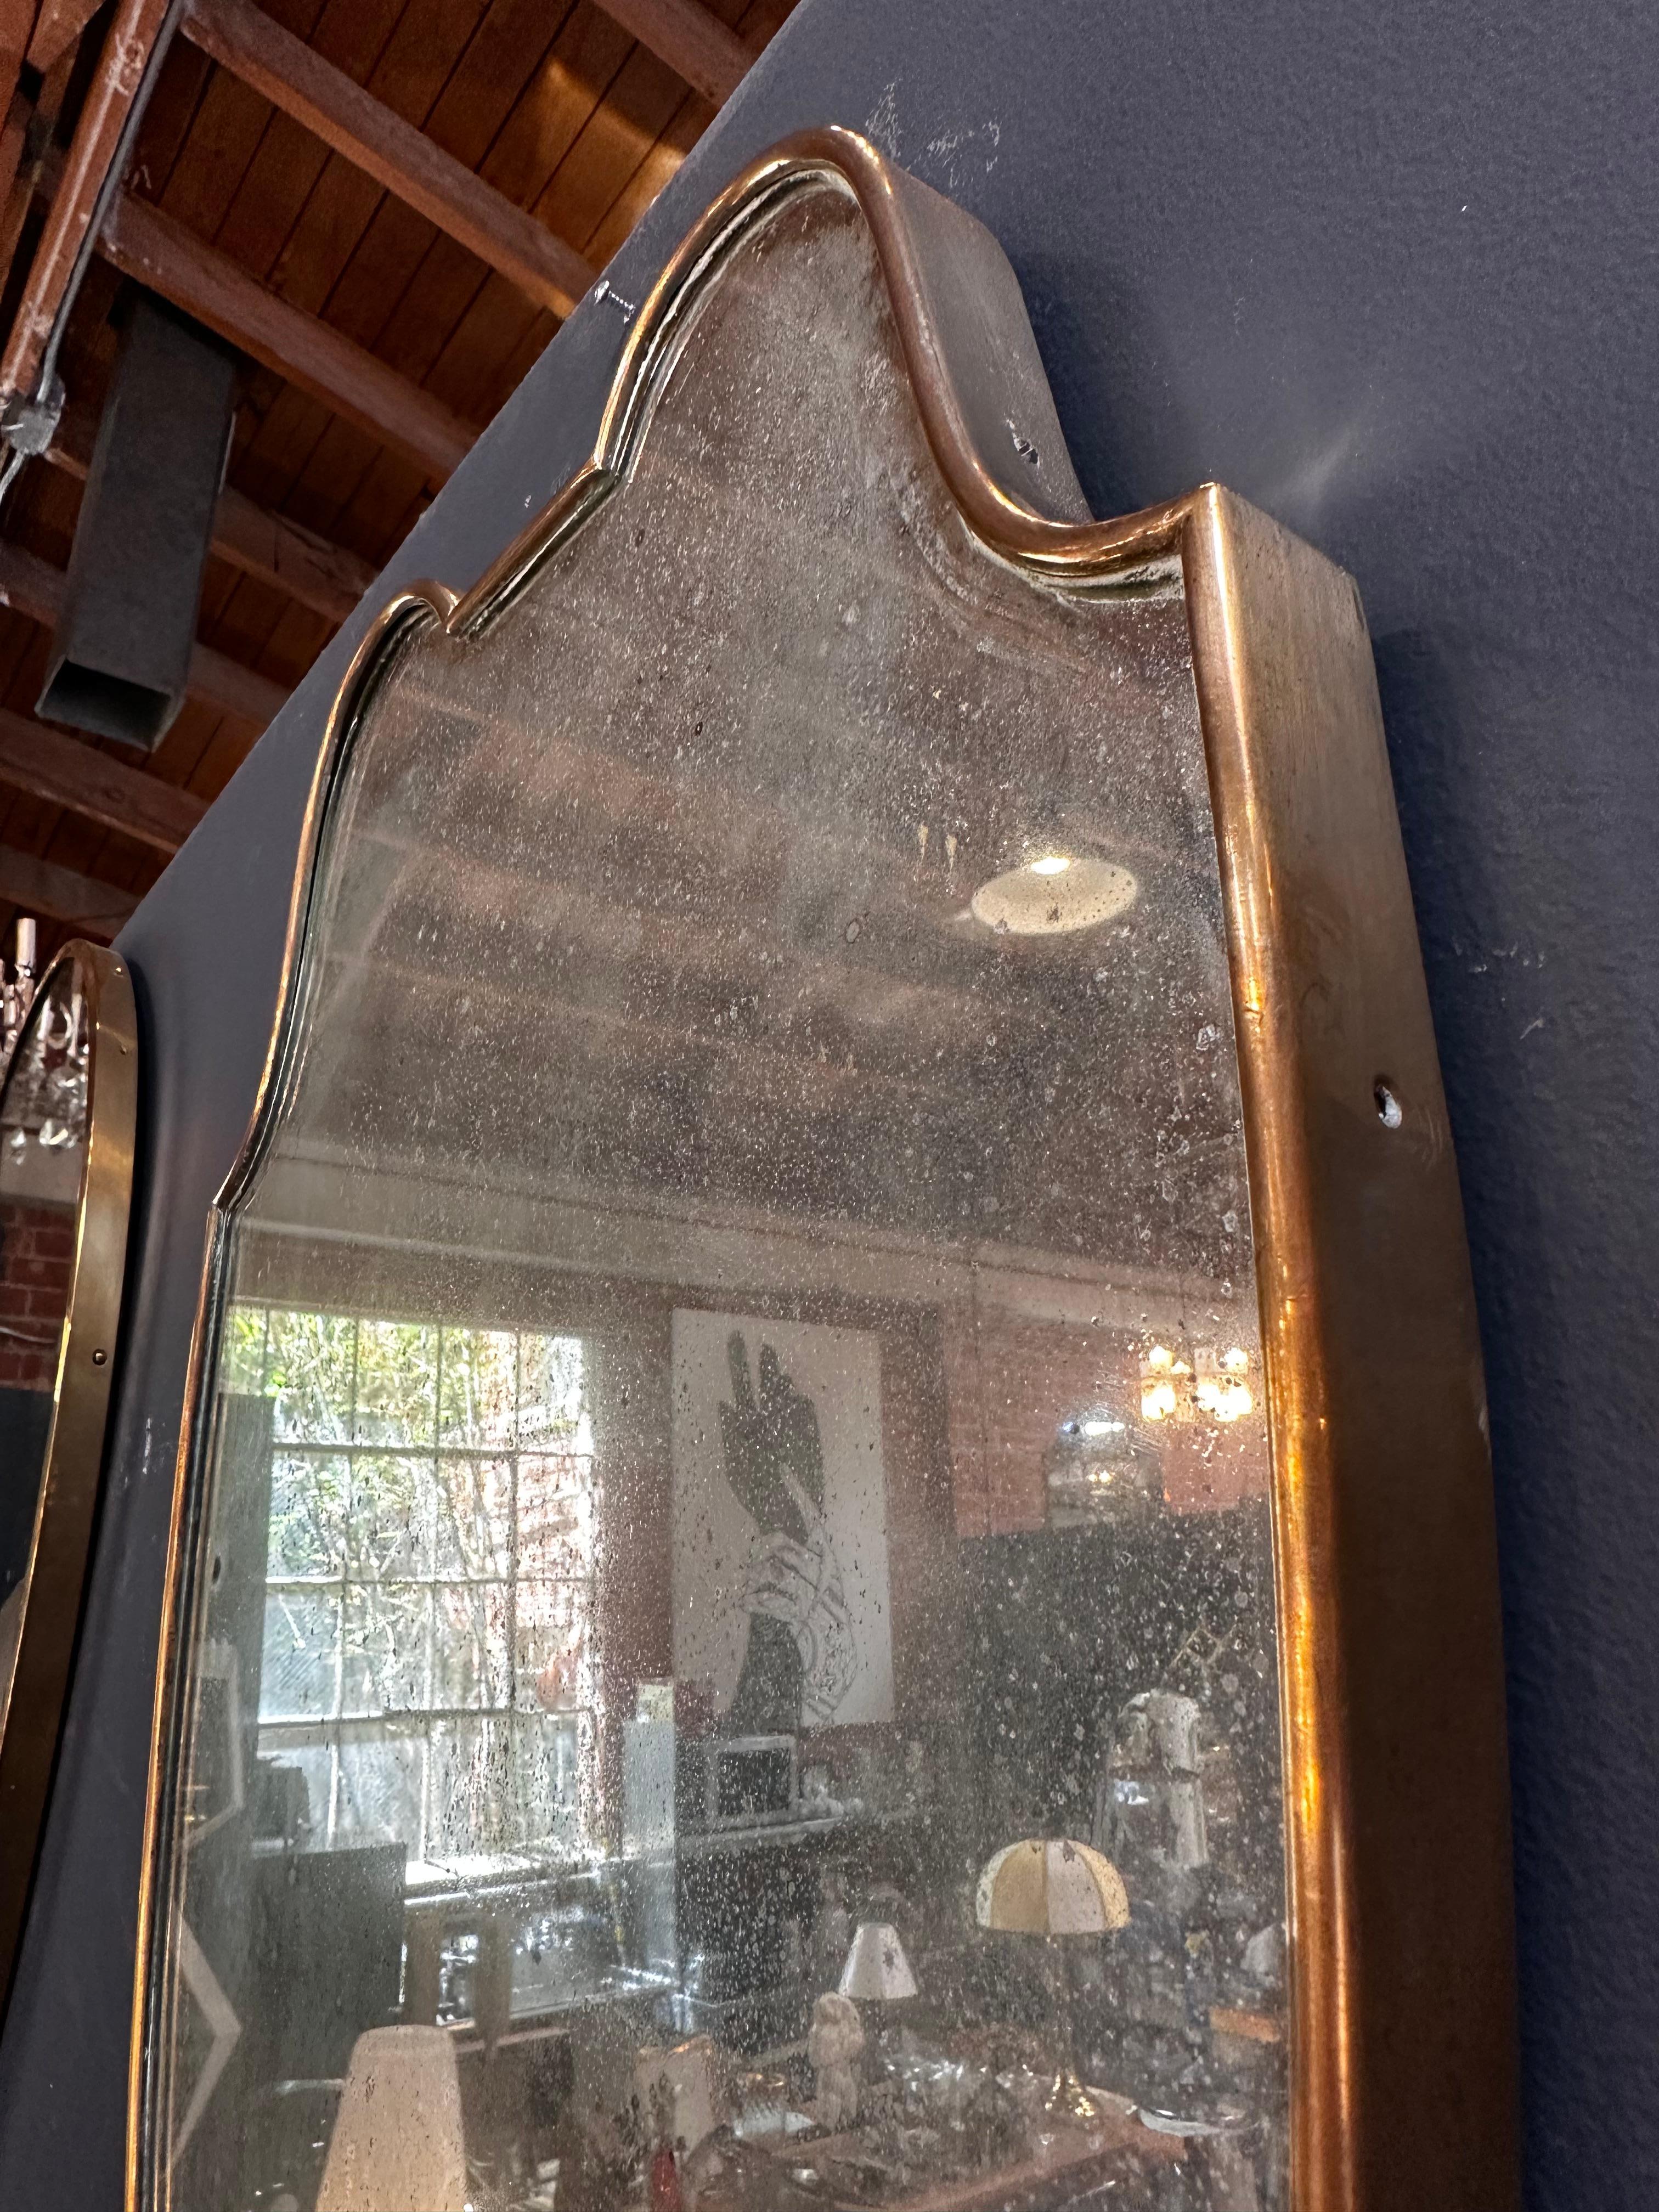 A vintage 1960s Italian brass wall mirror, showcasing original patina and an exceptionally chic brass frame. This piece combines timeless style with a touch of authentic character, embodying the essence of sophisticated design from that era.

